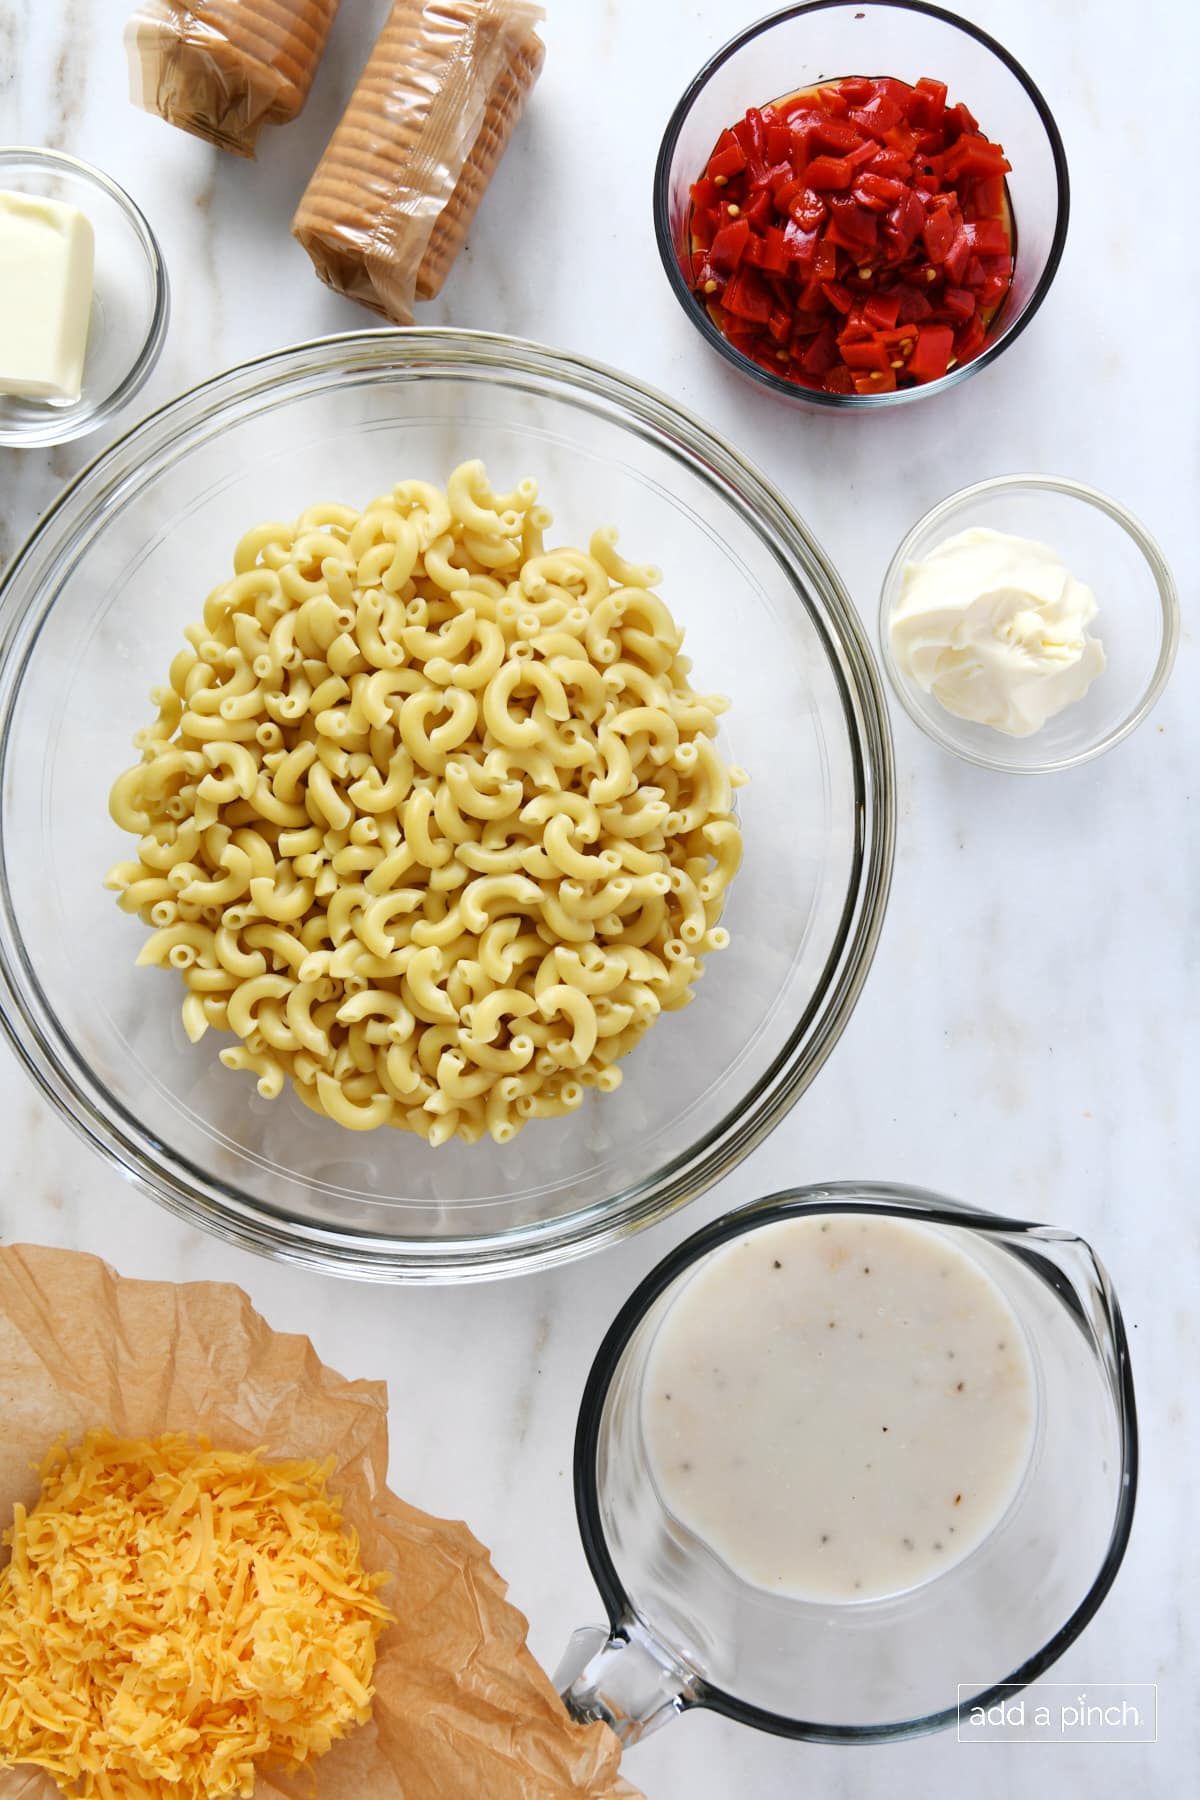 Glass bowls with ingredients for mac and cheese - butter, pimentos, mayo,  cream of chicken soup, elbow noodles, along with sleeves of crackers and mound of shredded cheese.